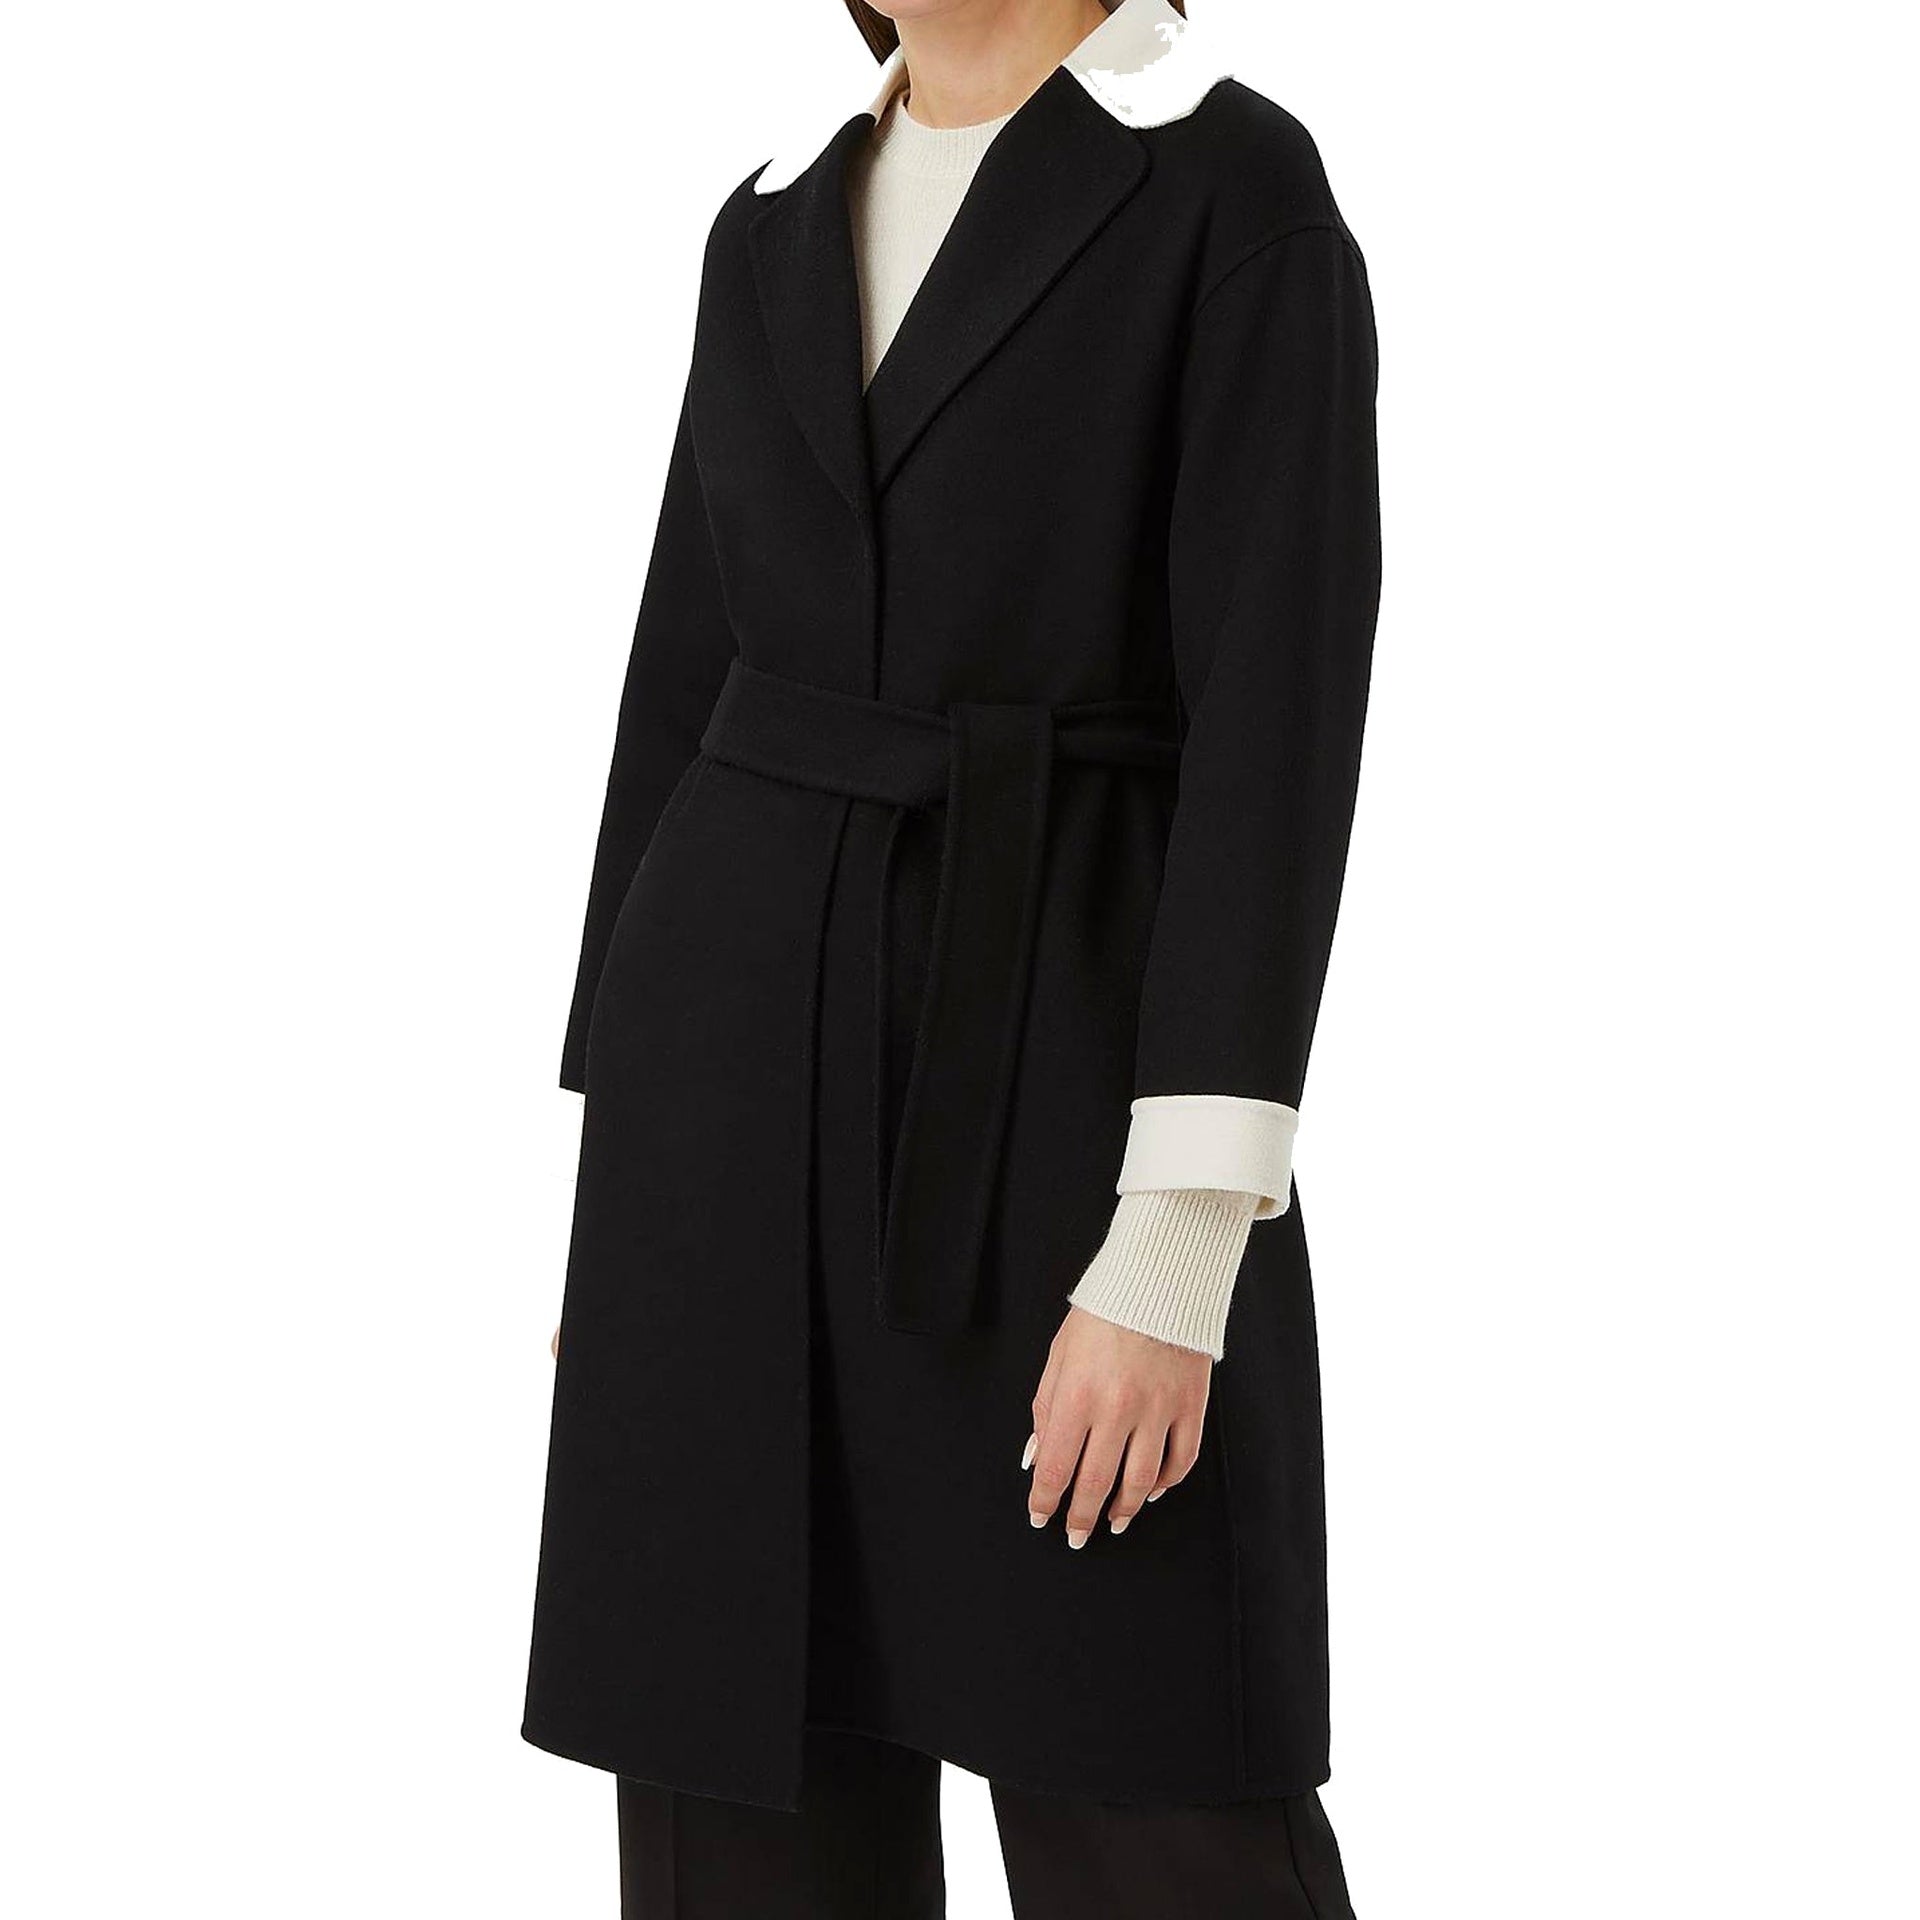 S-MAX-MARA-OUTLET-SALE-s-Max-Mara-Ada-Coat-WOMEN-CLOTHING-BLACK-38-ARCHIVE-COLLECTION-2.jpg